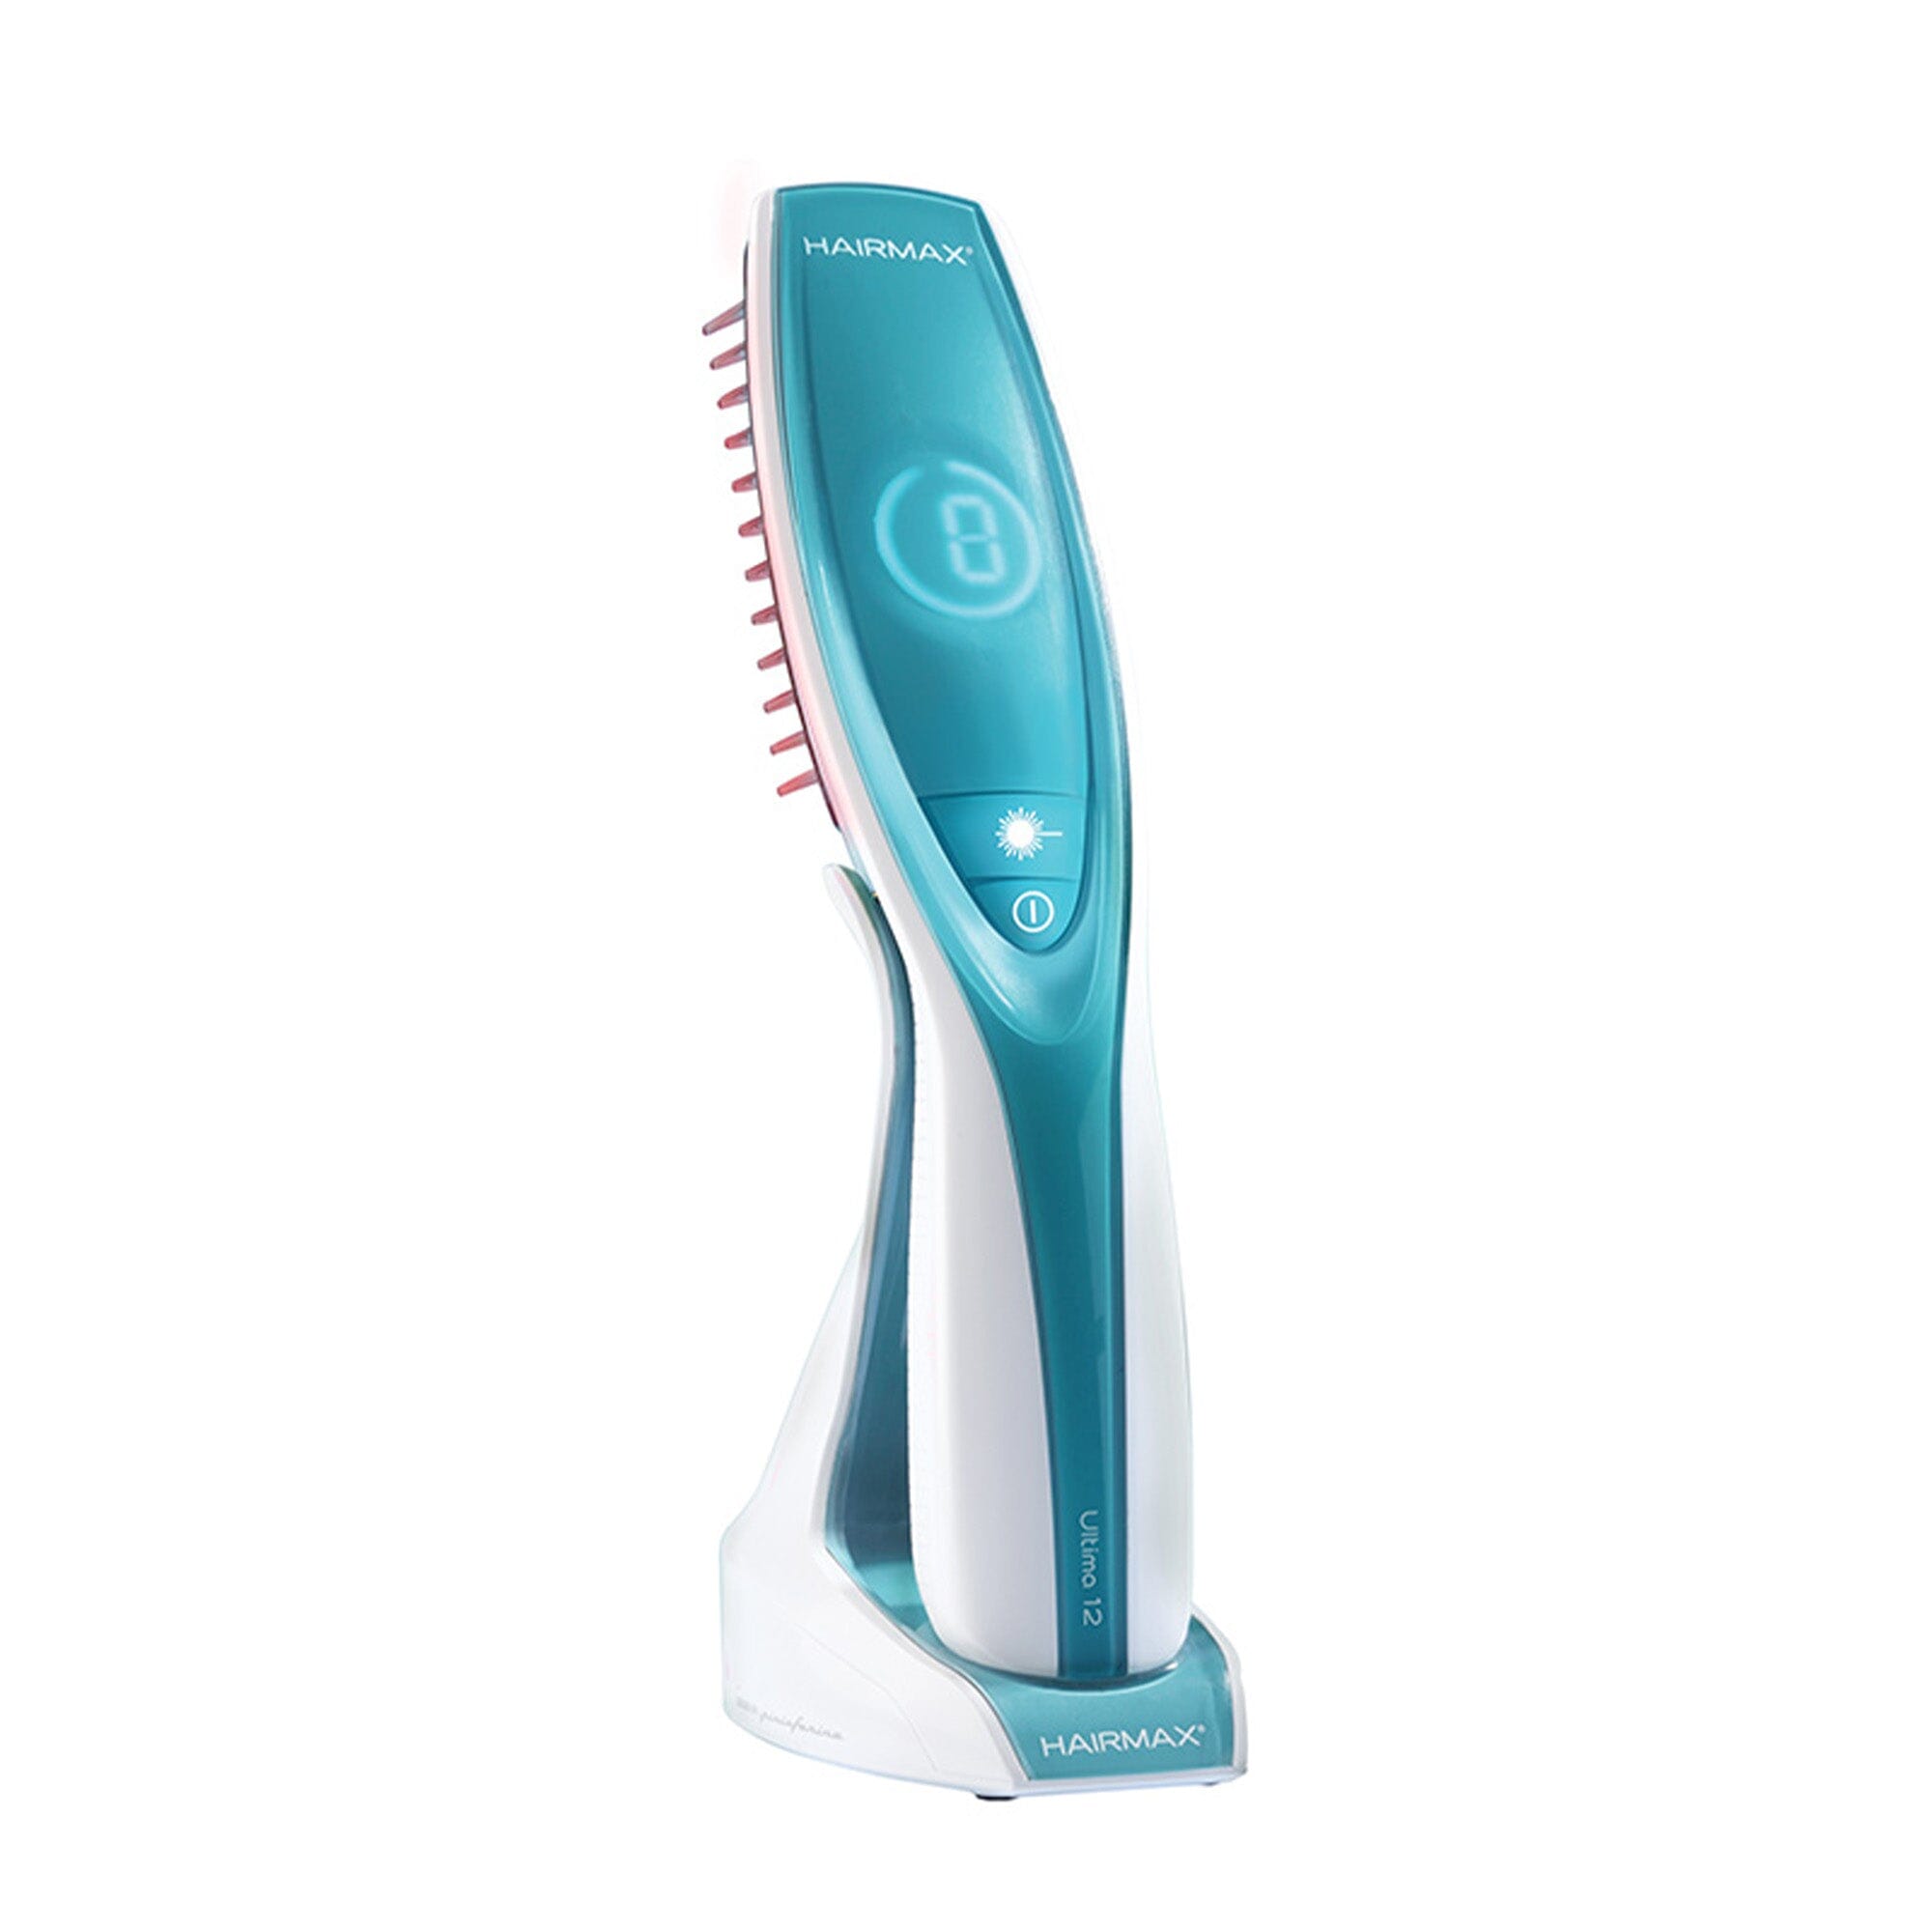 Hairmax Ultima 12 Laser Comb Hairmax Shop at Exclusive Beauty Club